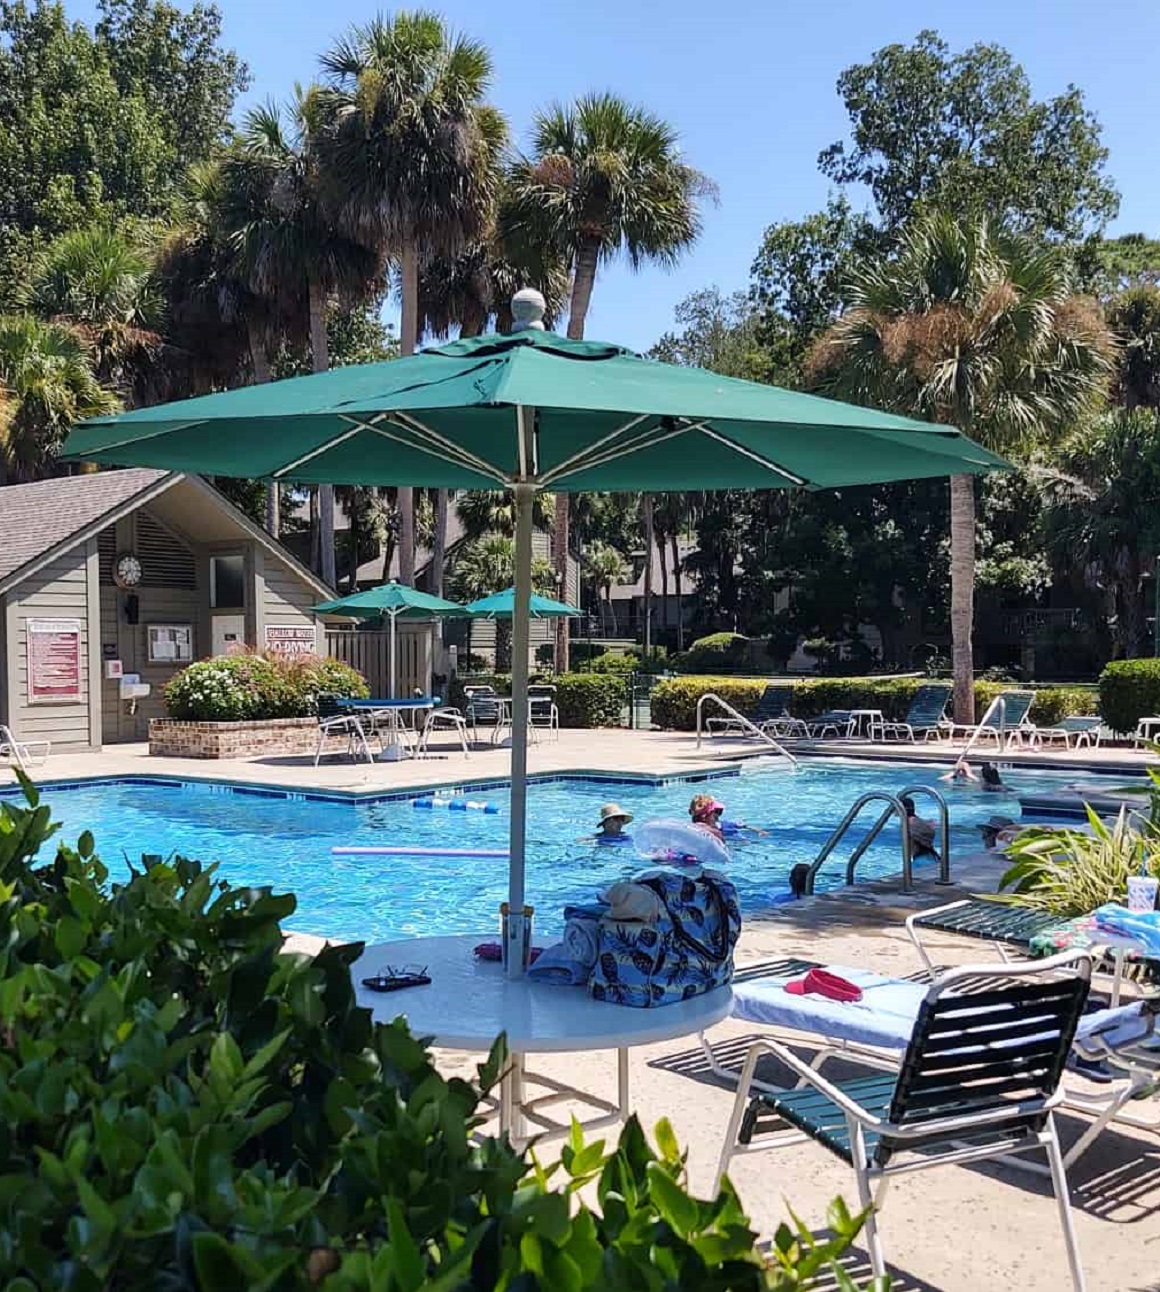 The Club Group, Hilton Head Island's top property management company, manages Spicebush at Sea Pines